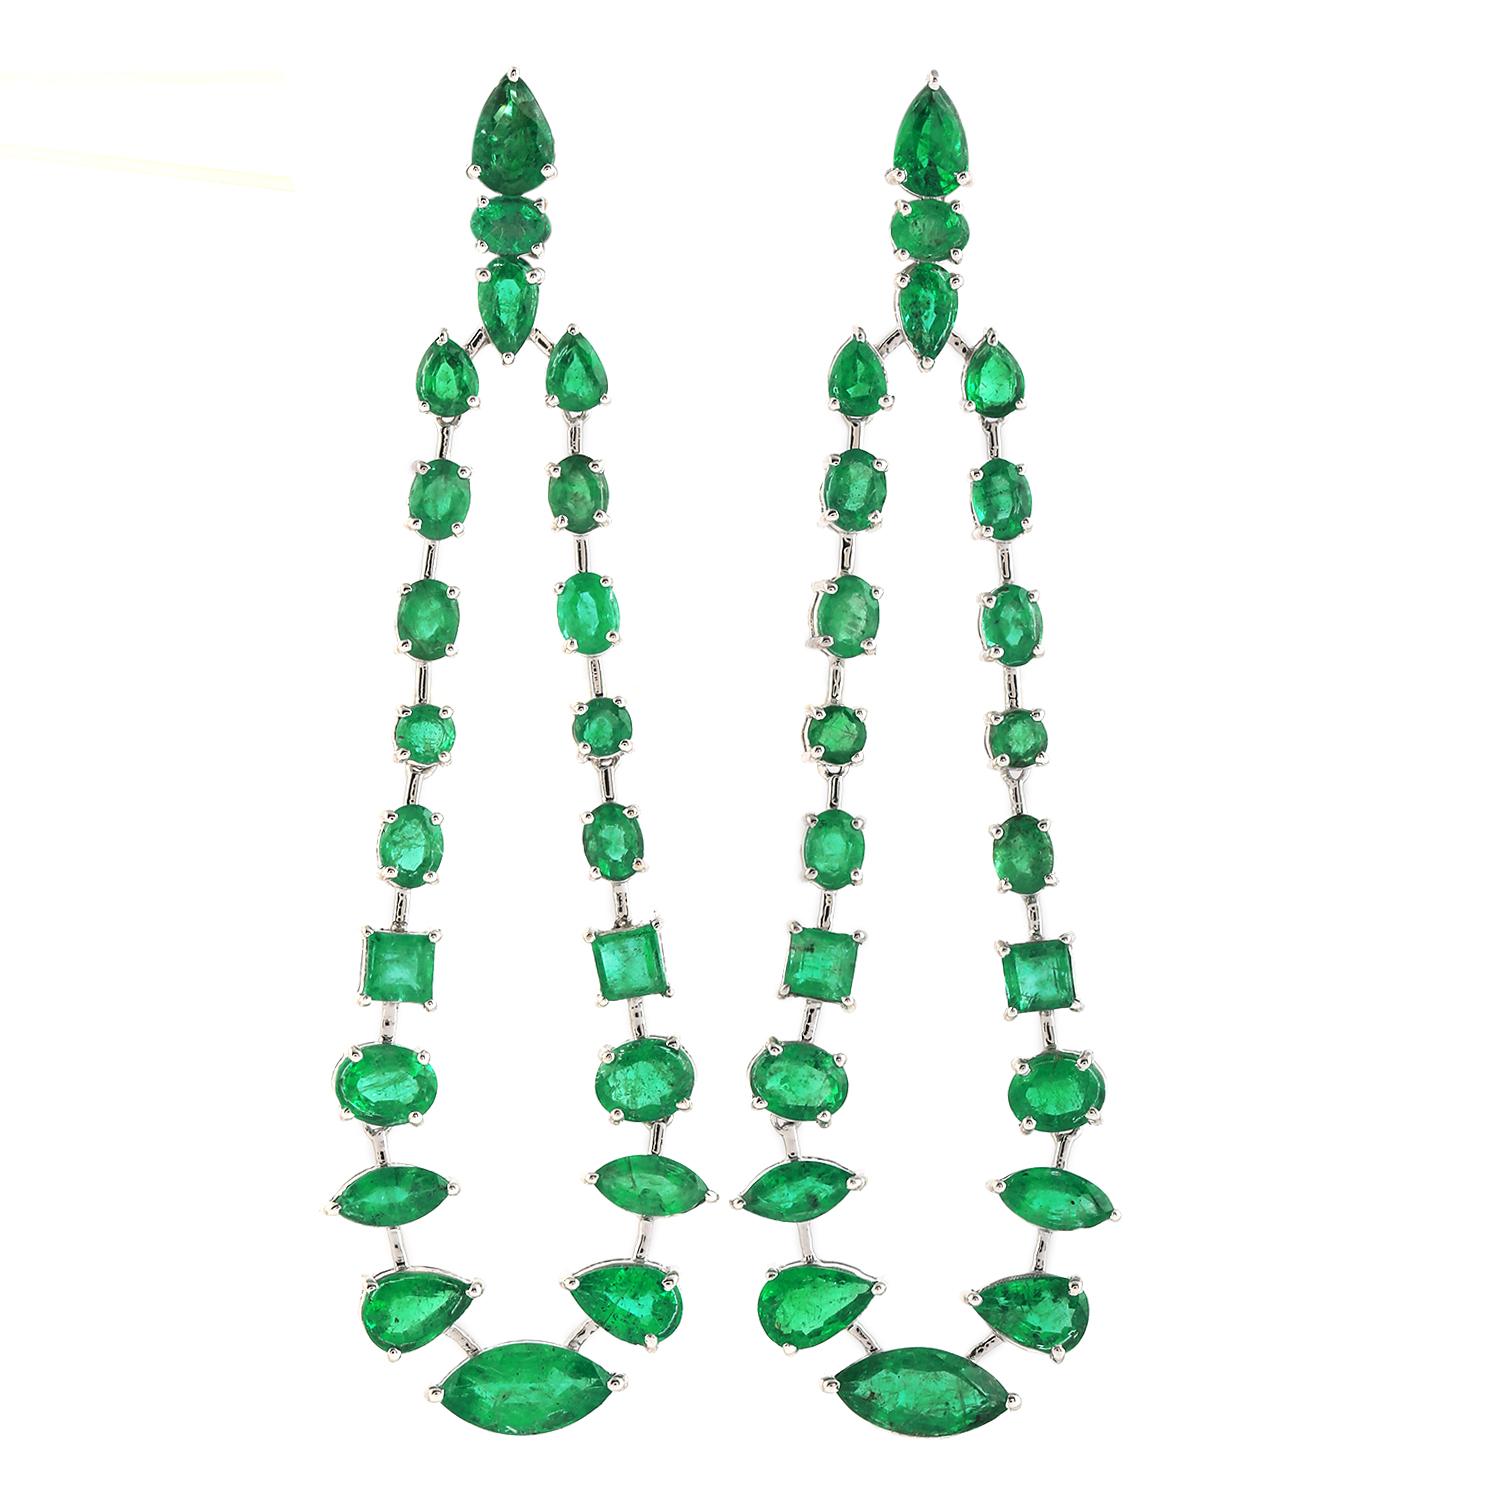 Multi Shaped Zambian Emerald Chandelier Earring Made in 18k White Gold In New Condition For Sale In New York, NY